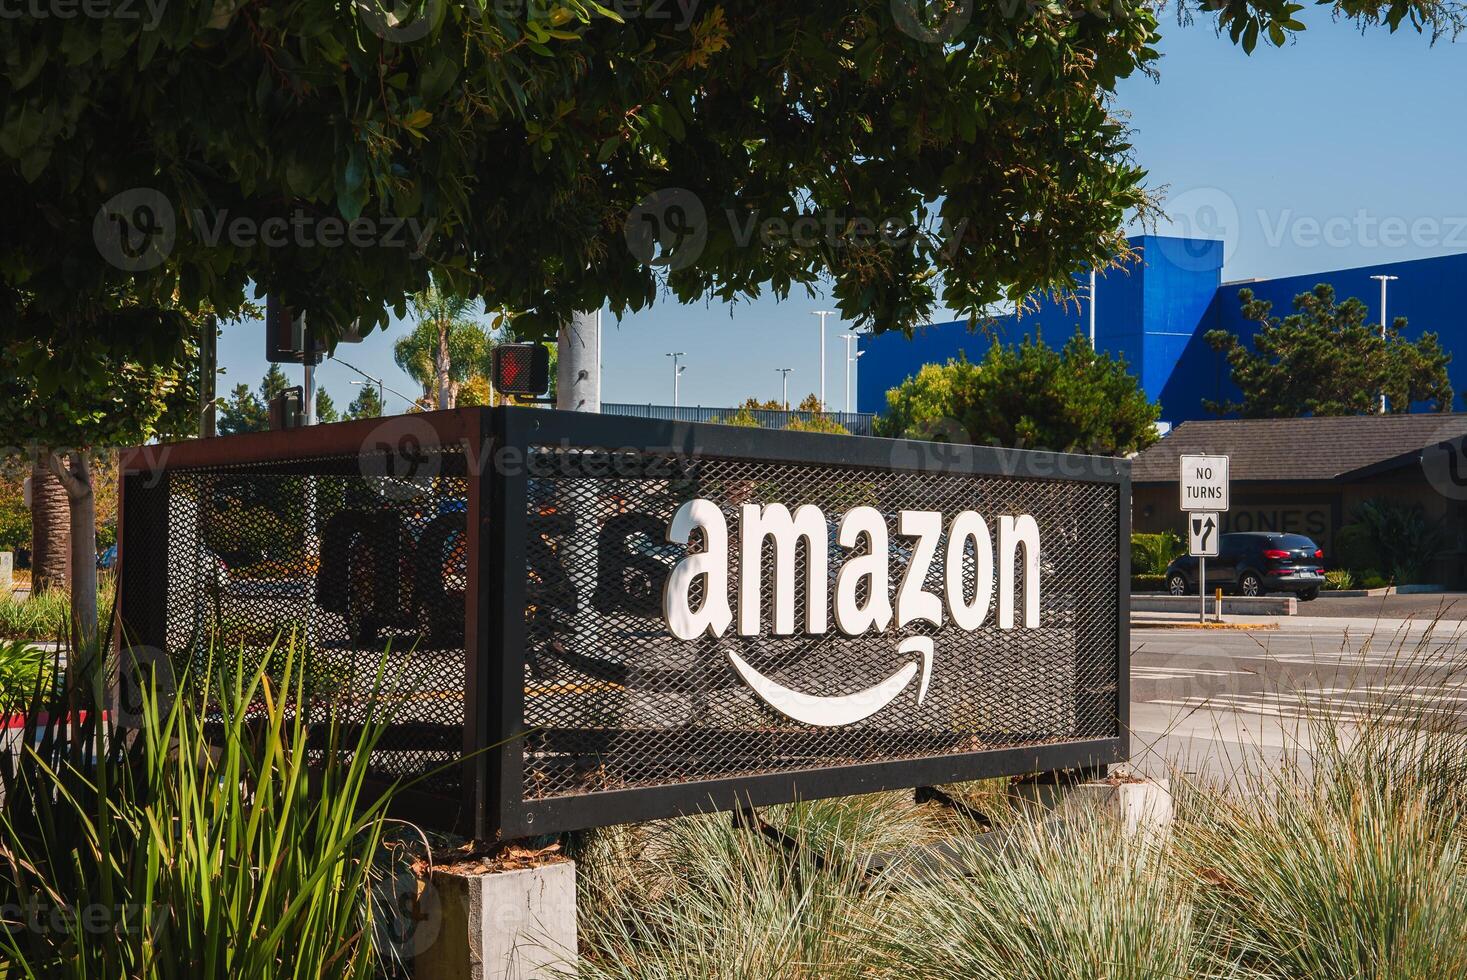 Security fence at Amazon facility with logo, trees, and blue building photo